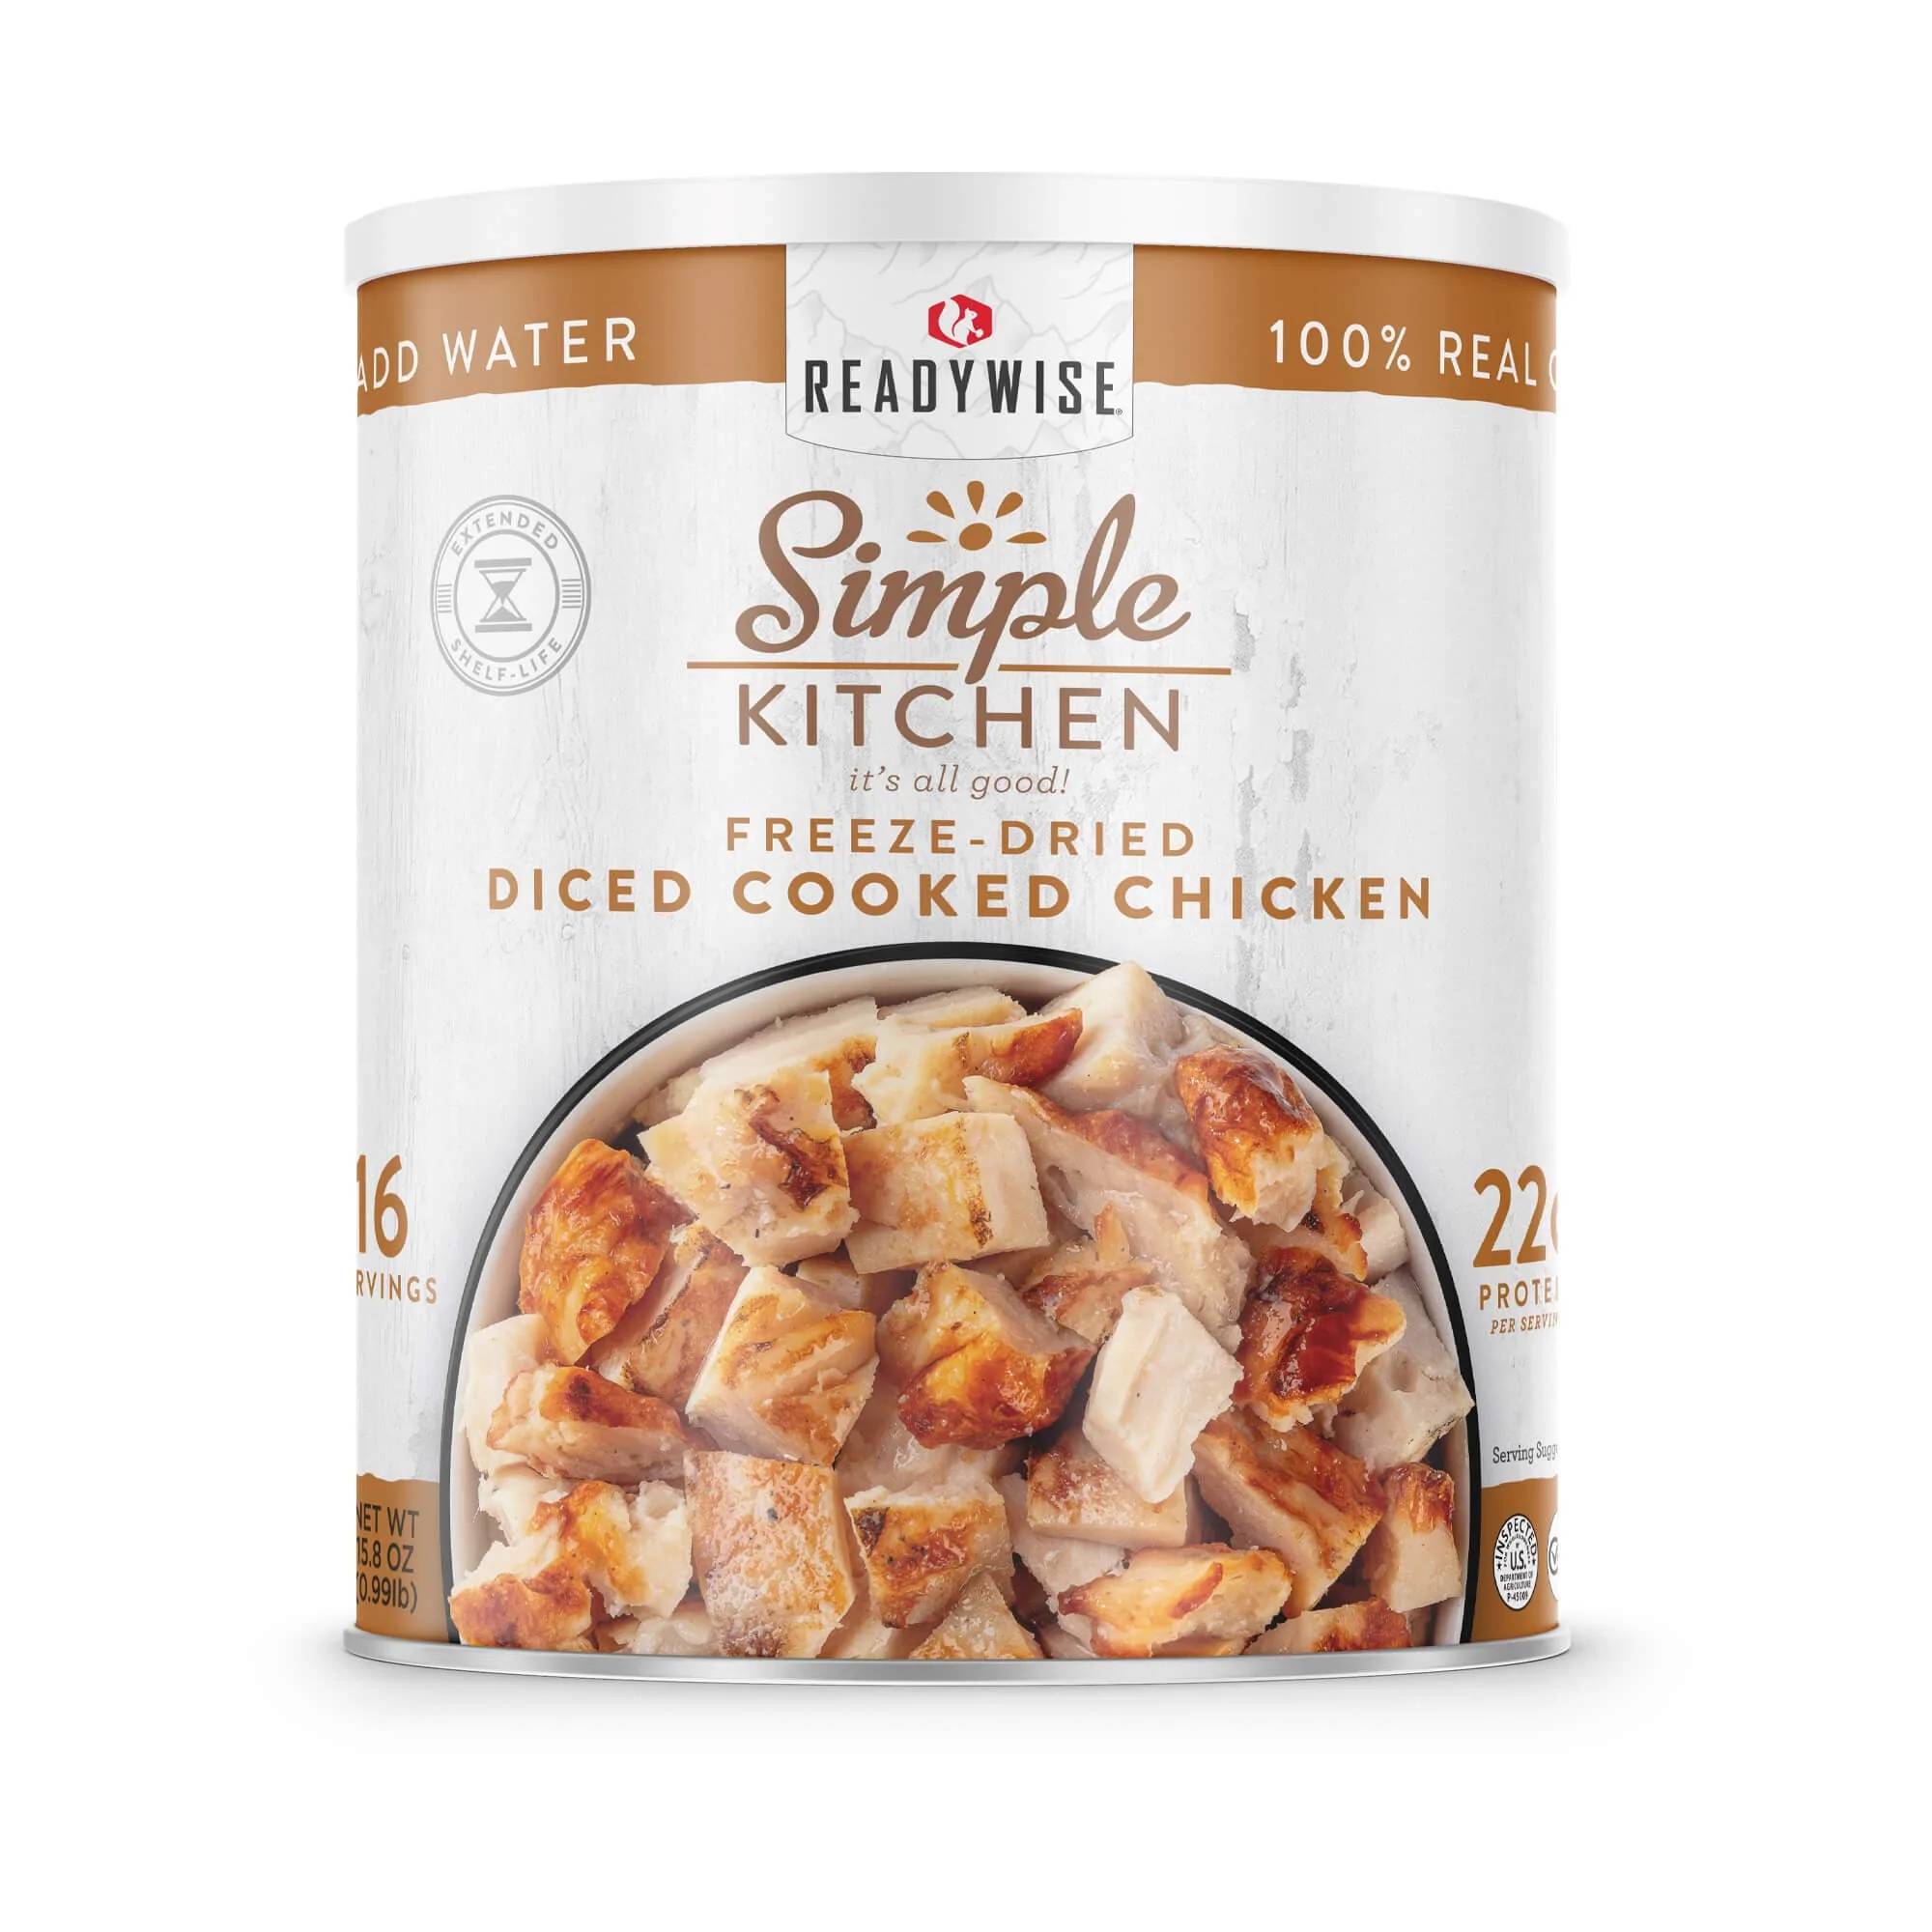 Redwise simple kitchen canned chicken.